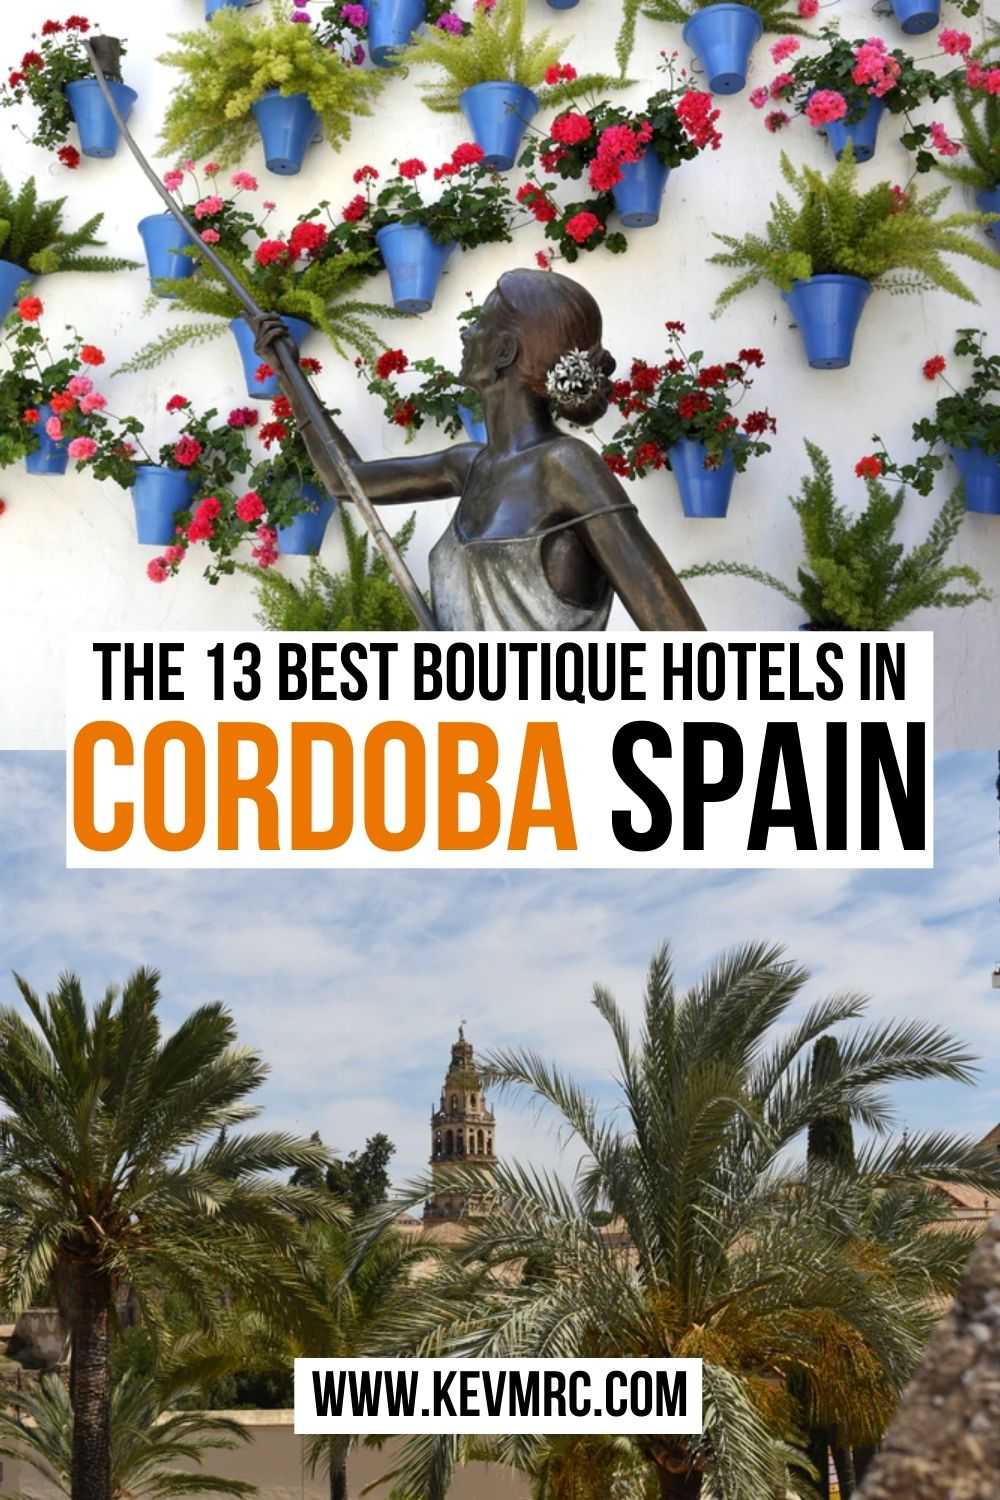 The Best Boutique Hotels in Cordoba Spain. cordoba best hotels | cordoba travel | spain travel | andalusian style | andalusian style | boutique decor